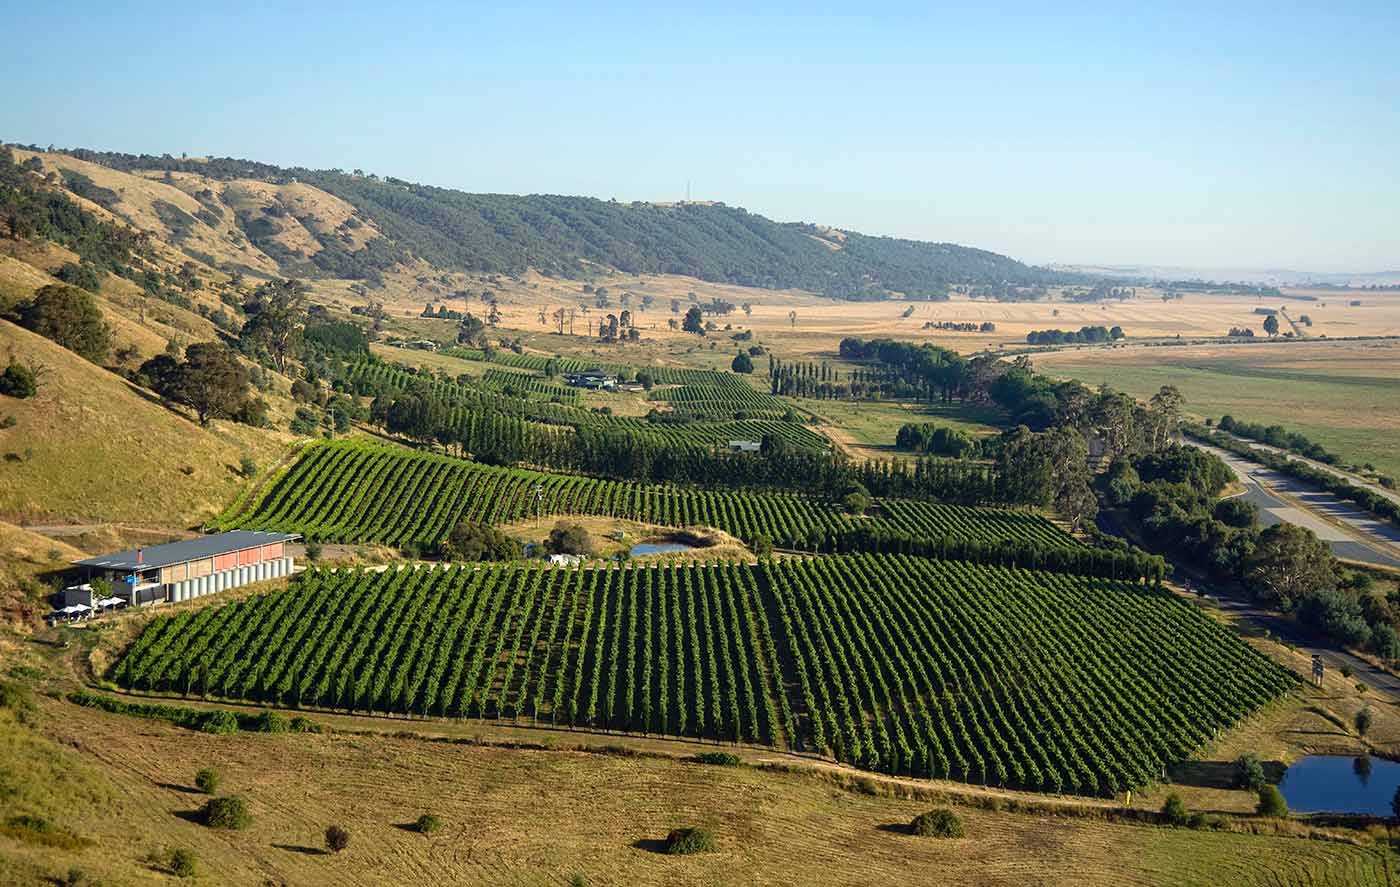 Photo, possibly an aerial shot, showing the vineyard with a dam in the middle and the winery building at its far left edge. Hills are visible in the distance, and a road on the right.